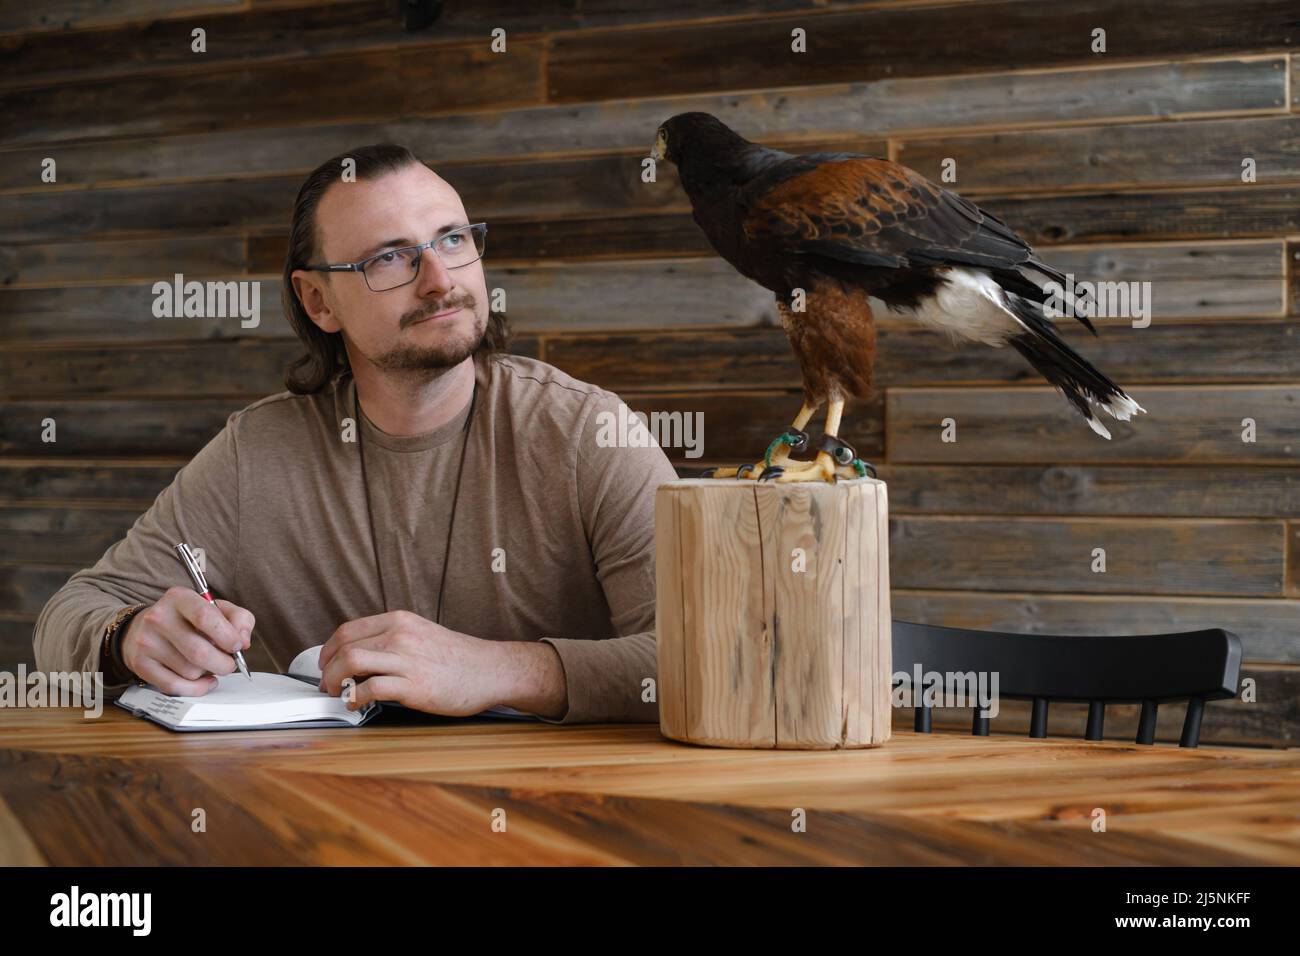 Man is working, writing with wild bird at home by the table. Making noted, memories, diary with eagle as pet. Unusual animals at home. Human Stock Photo